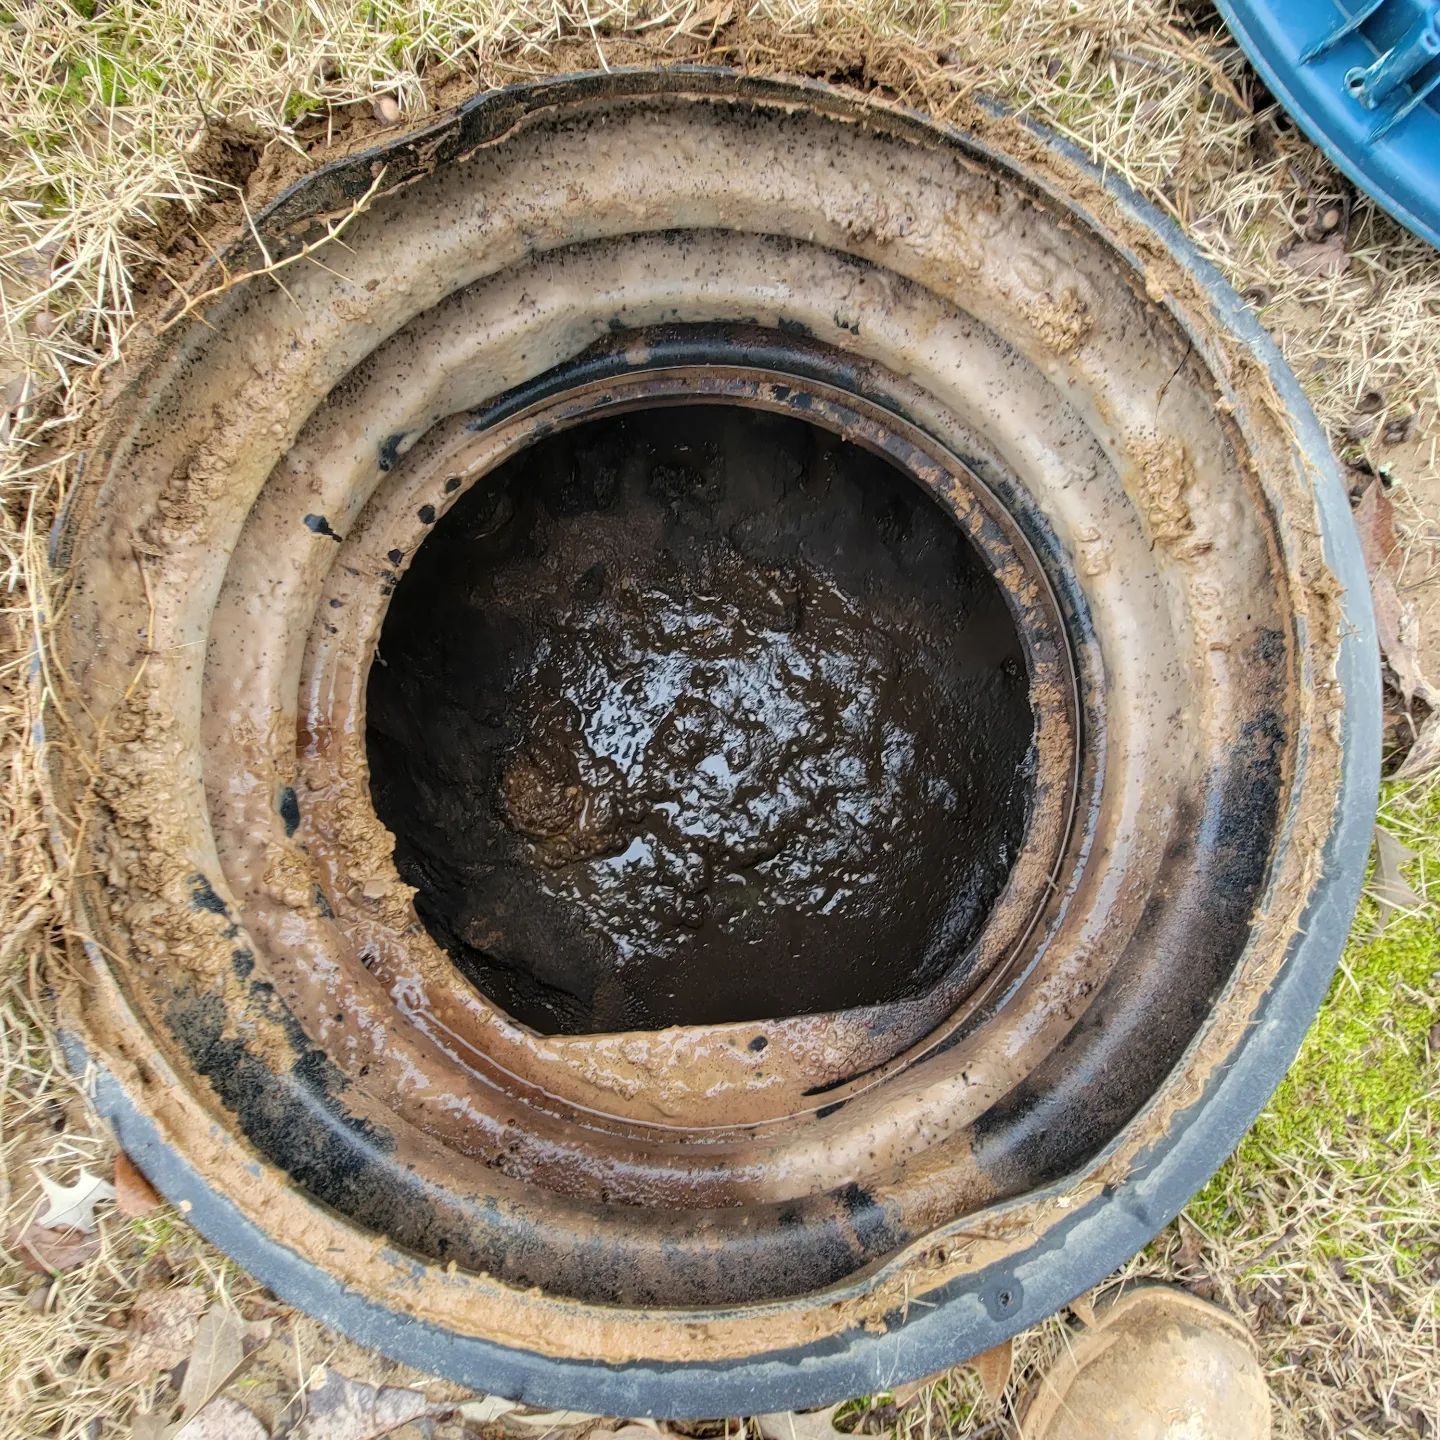 Oxford Septic Services
